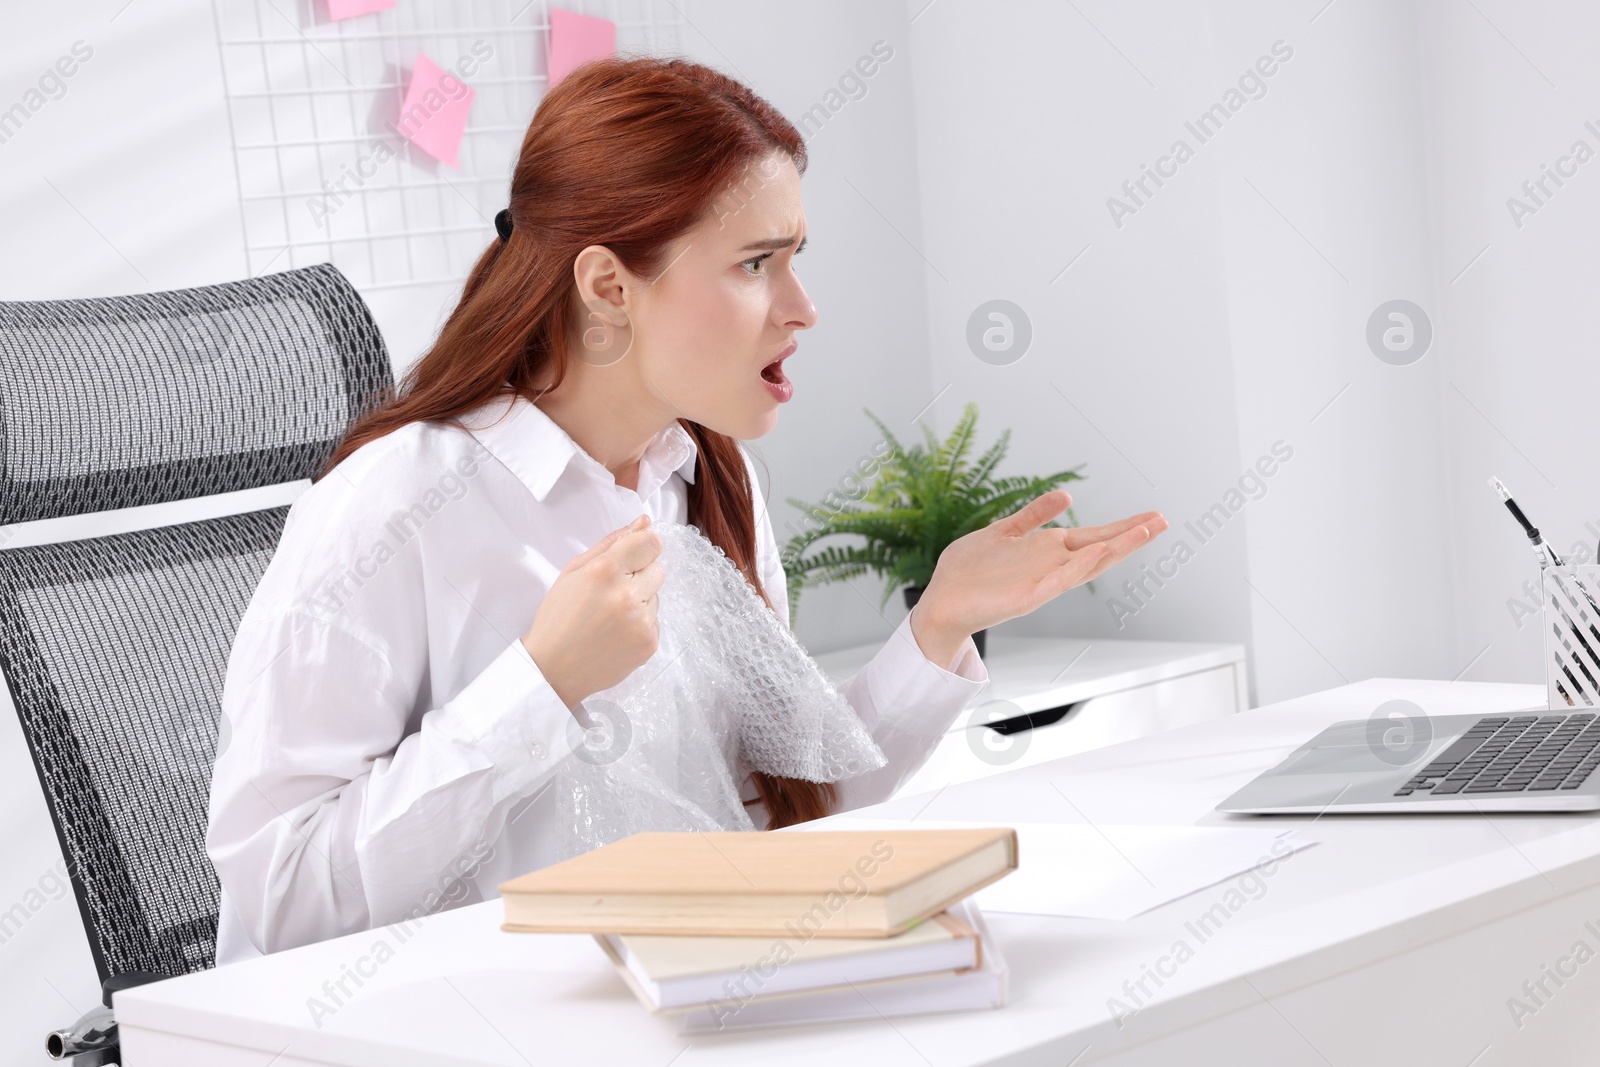 Photo of Woman popping bubble wrap at desk in office. Stress relief